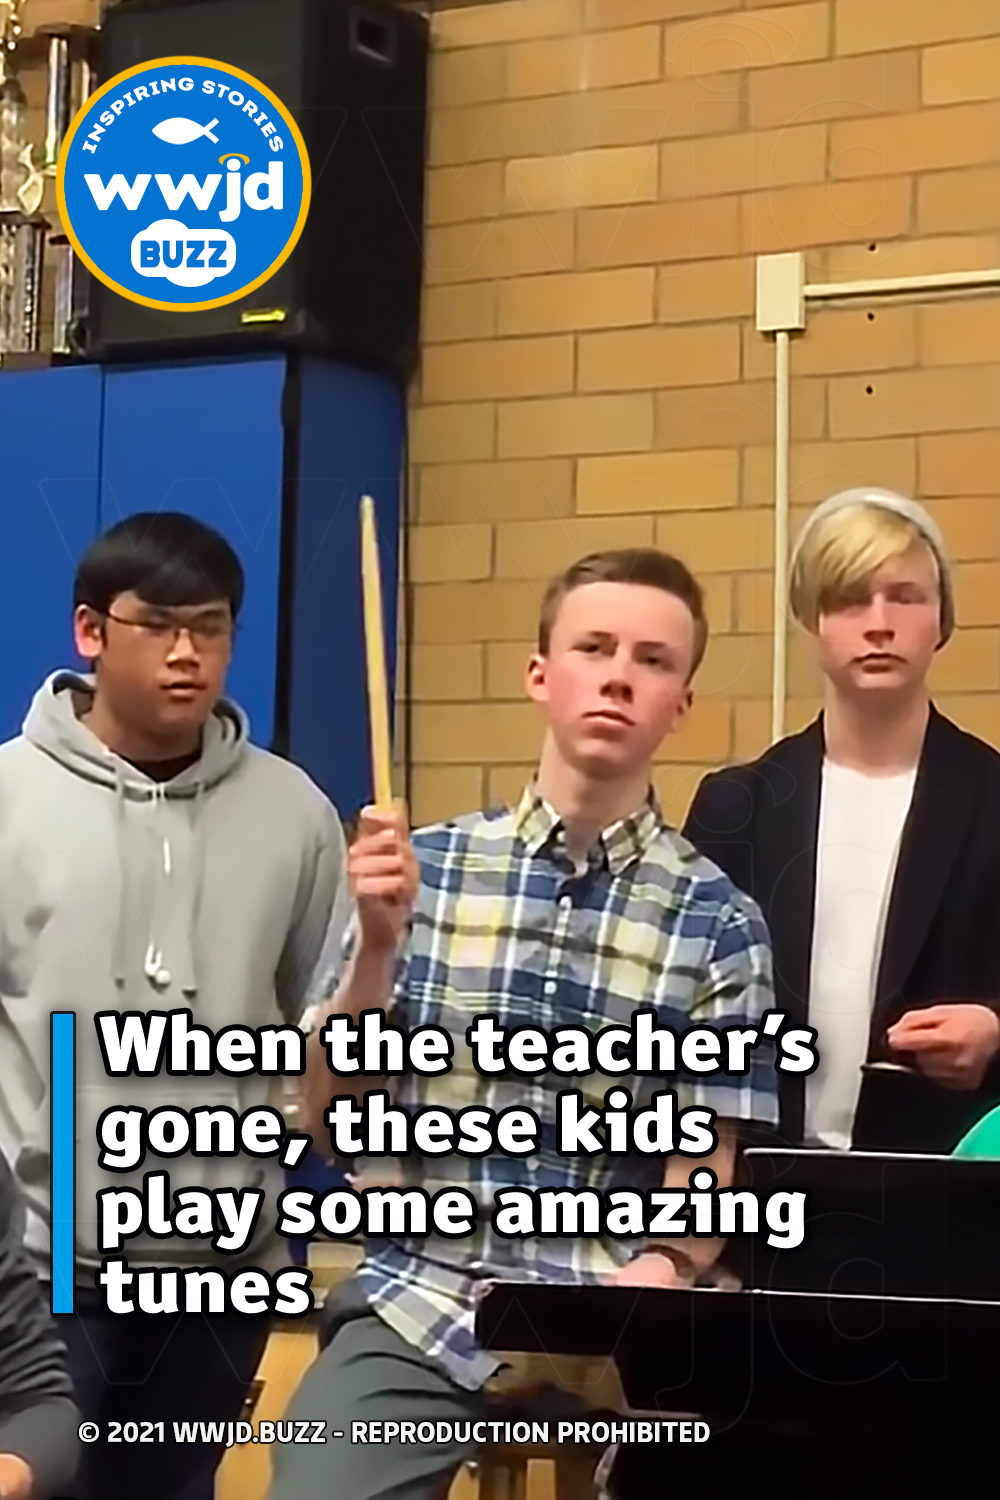 When the teacher’s gone, these kids play some amazing tunes